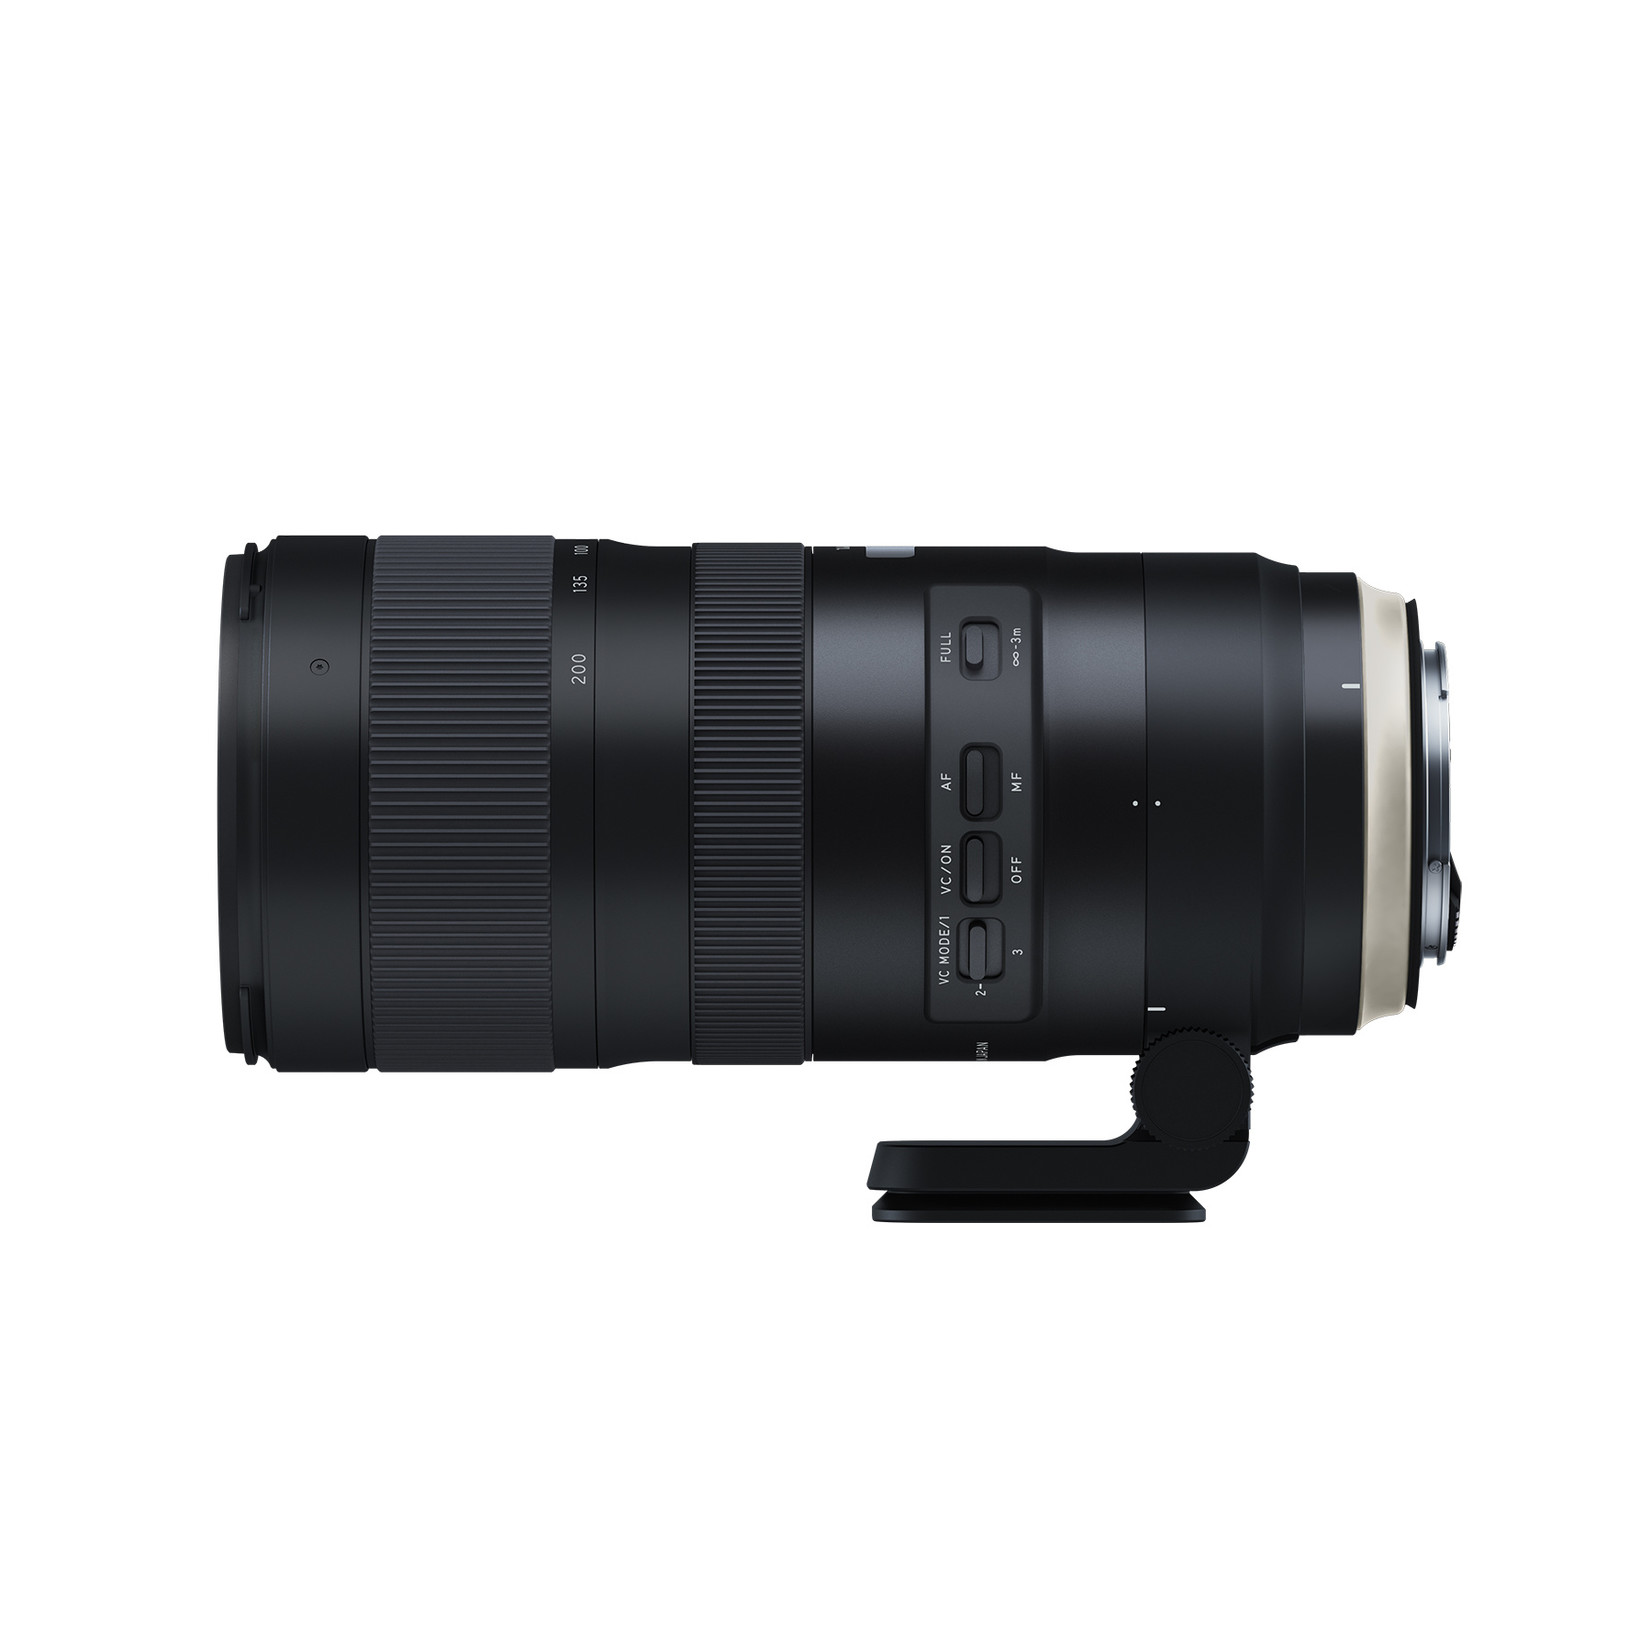 Tamron SP 70-200mm F/2.8 Di USD G2 w/ hood and case (Canon)